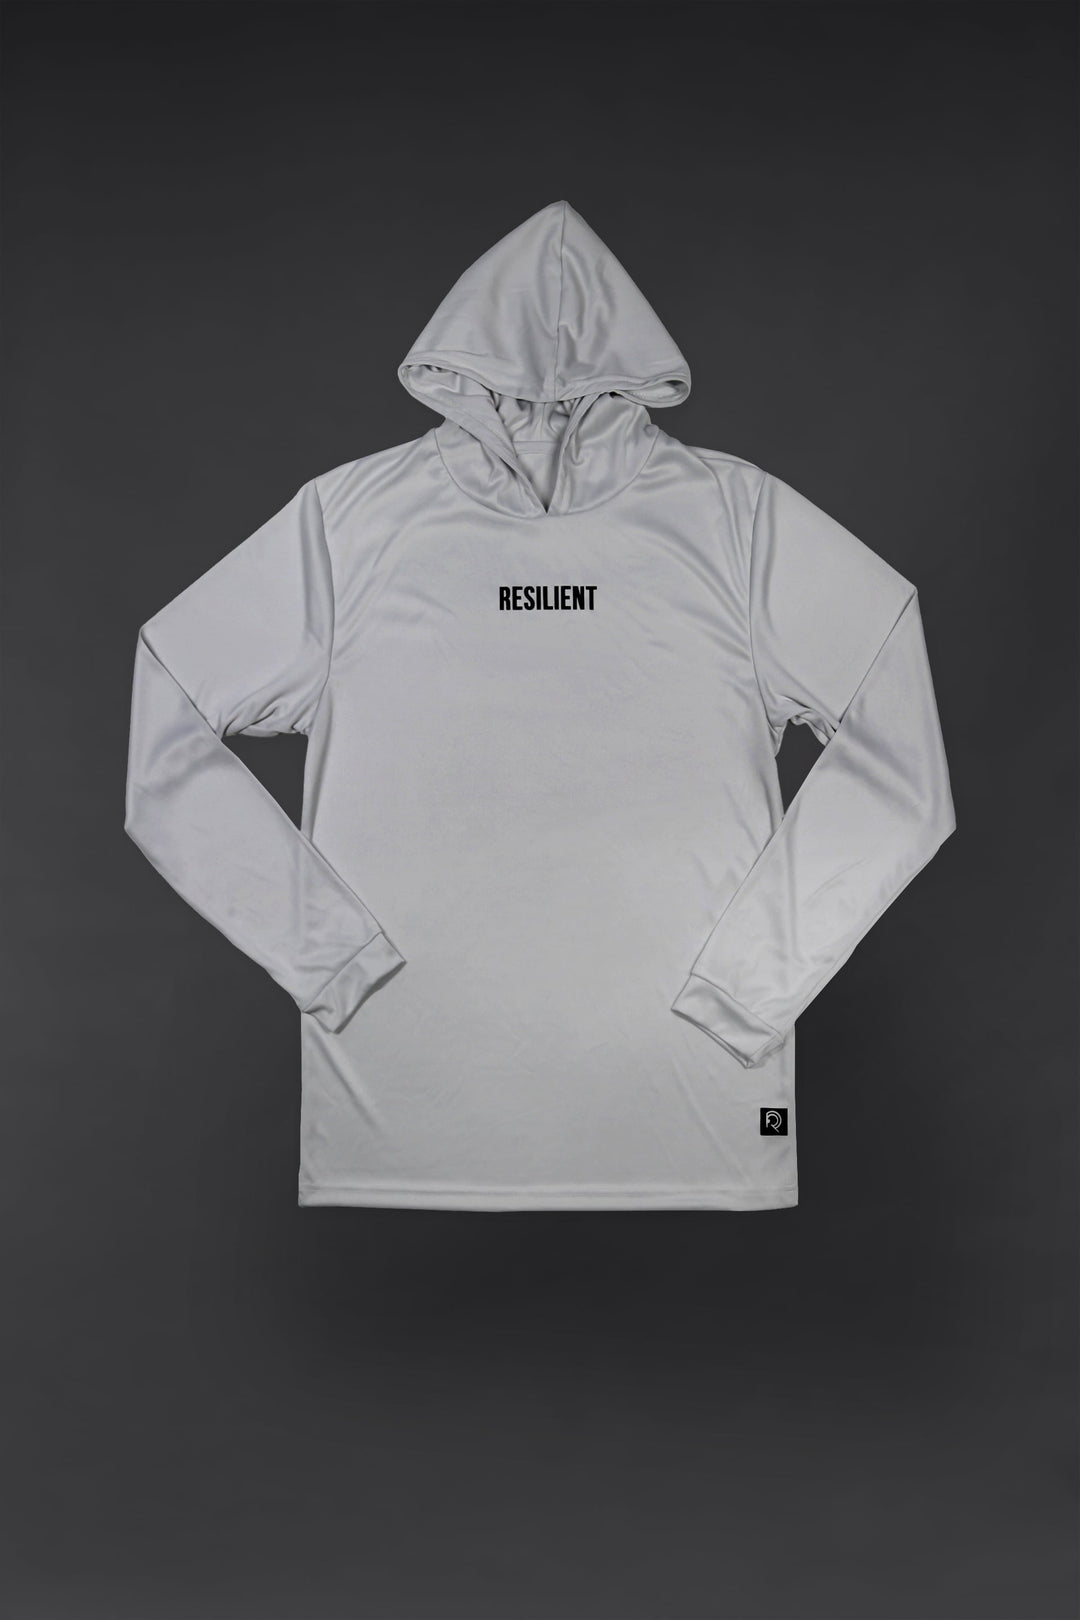 “RESILIENT" Dry Fit Hooded Long Sleeve T-Shirt